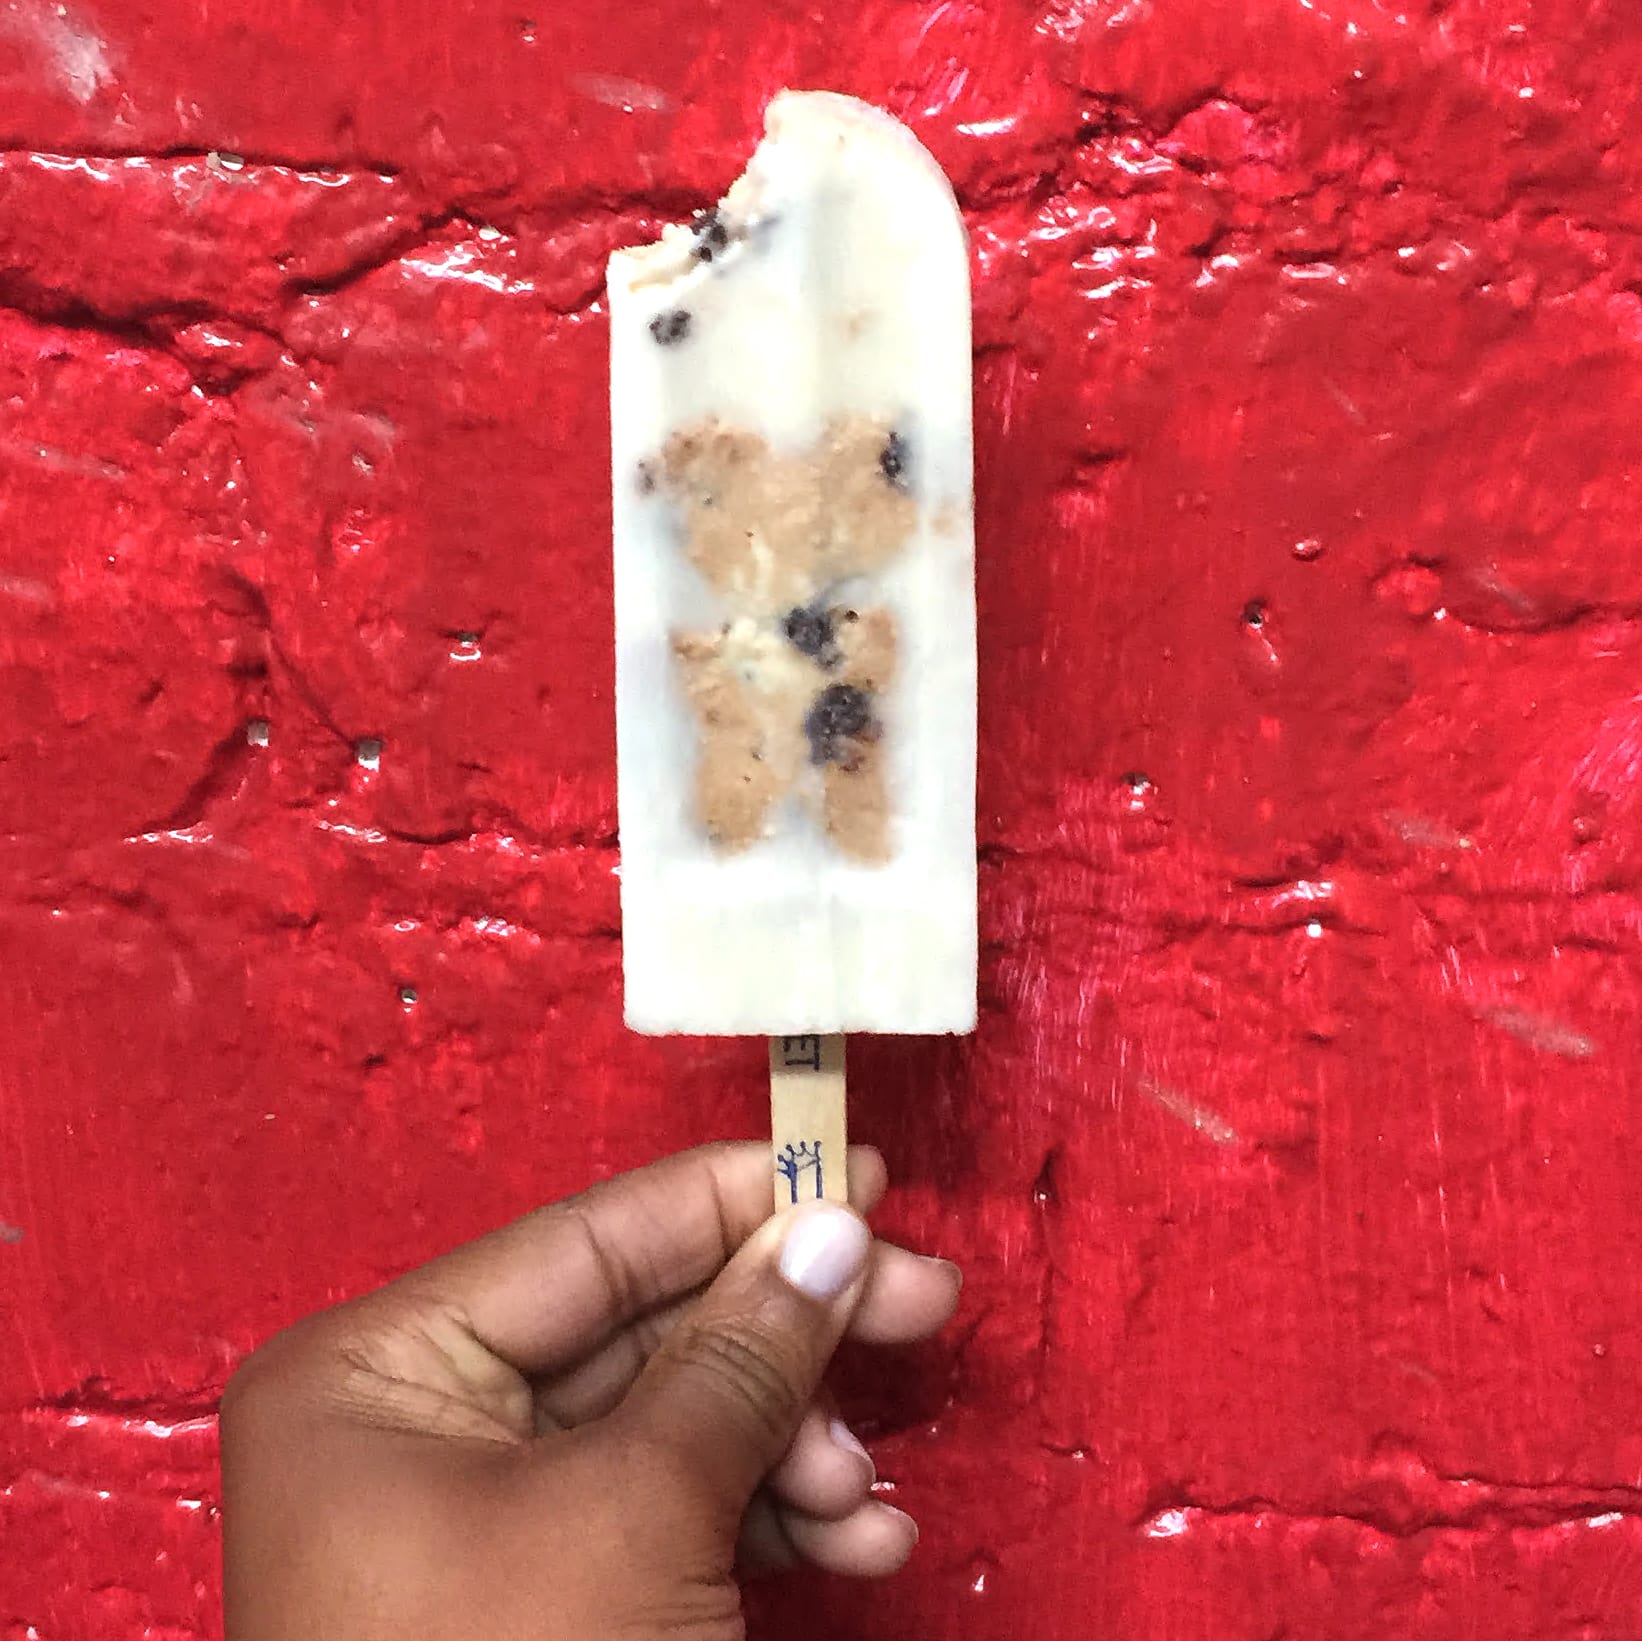 King of Pops' Cookies n' Cream from Steven and Nick Carse of King of Pops in Atlanta